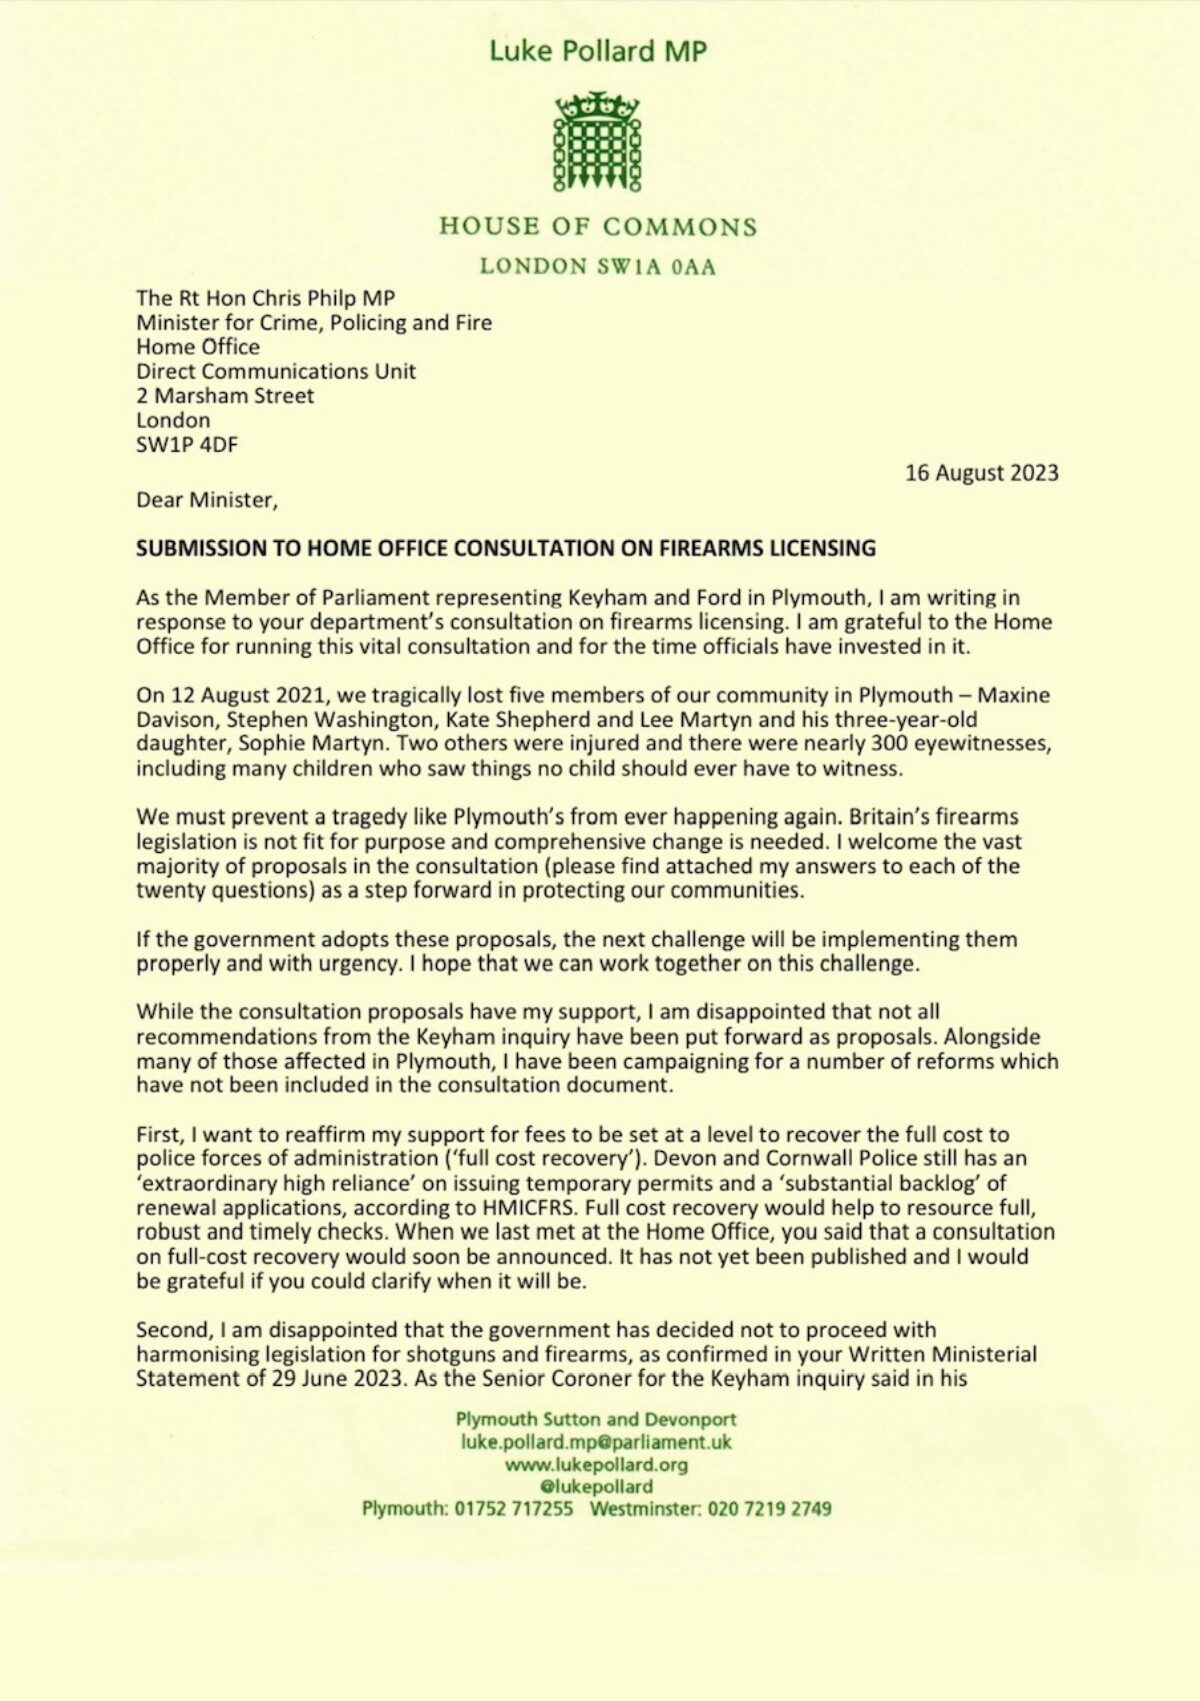 Luke Pollard letter to the Minister for Crime, Policing and Fire